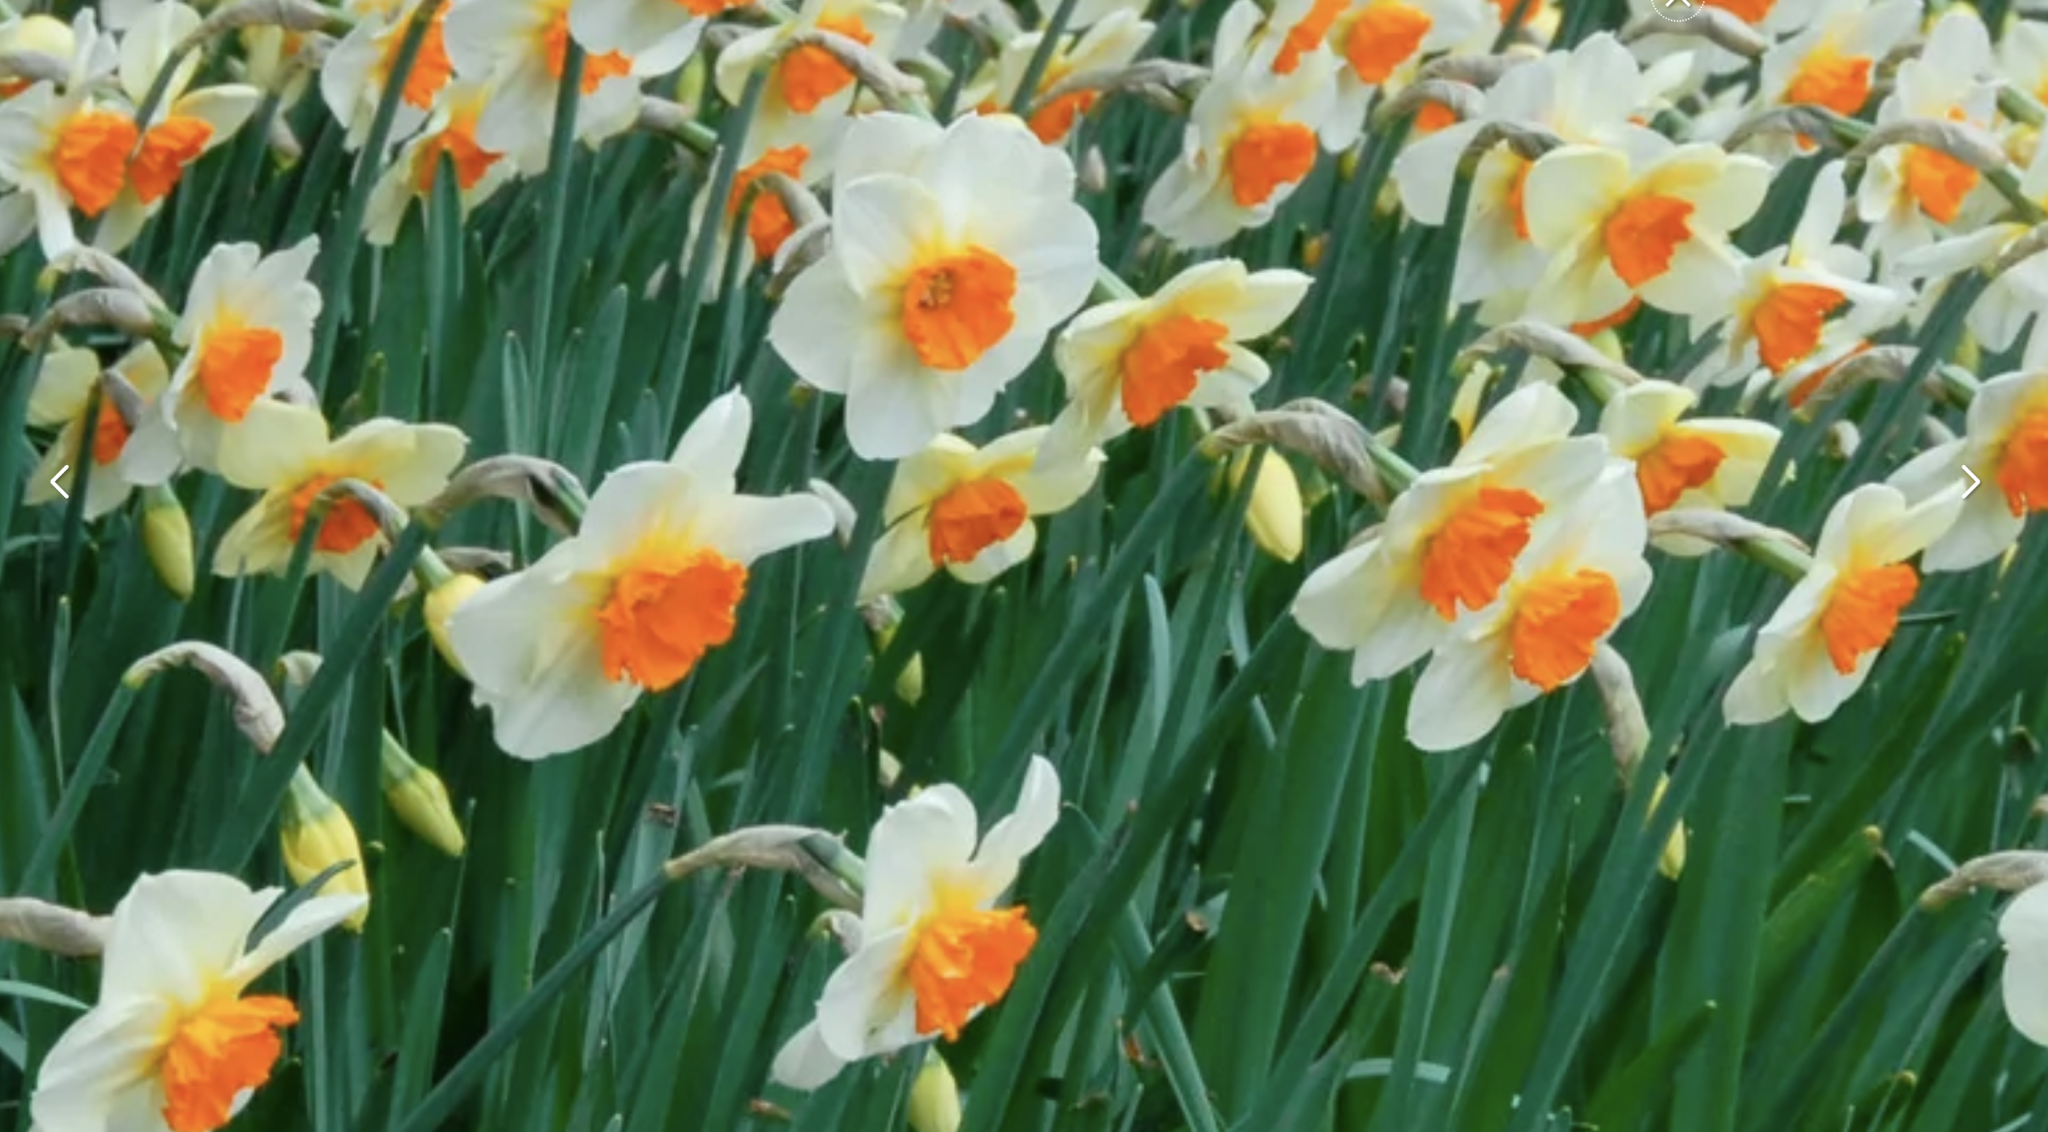 white daffodils with yellow centers